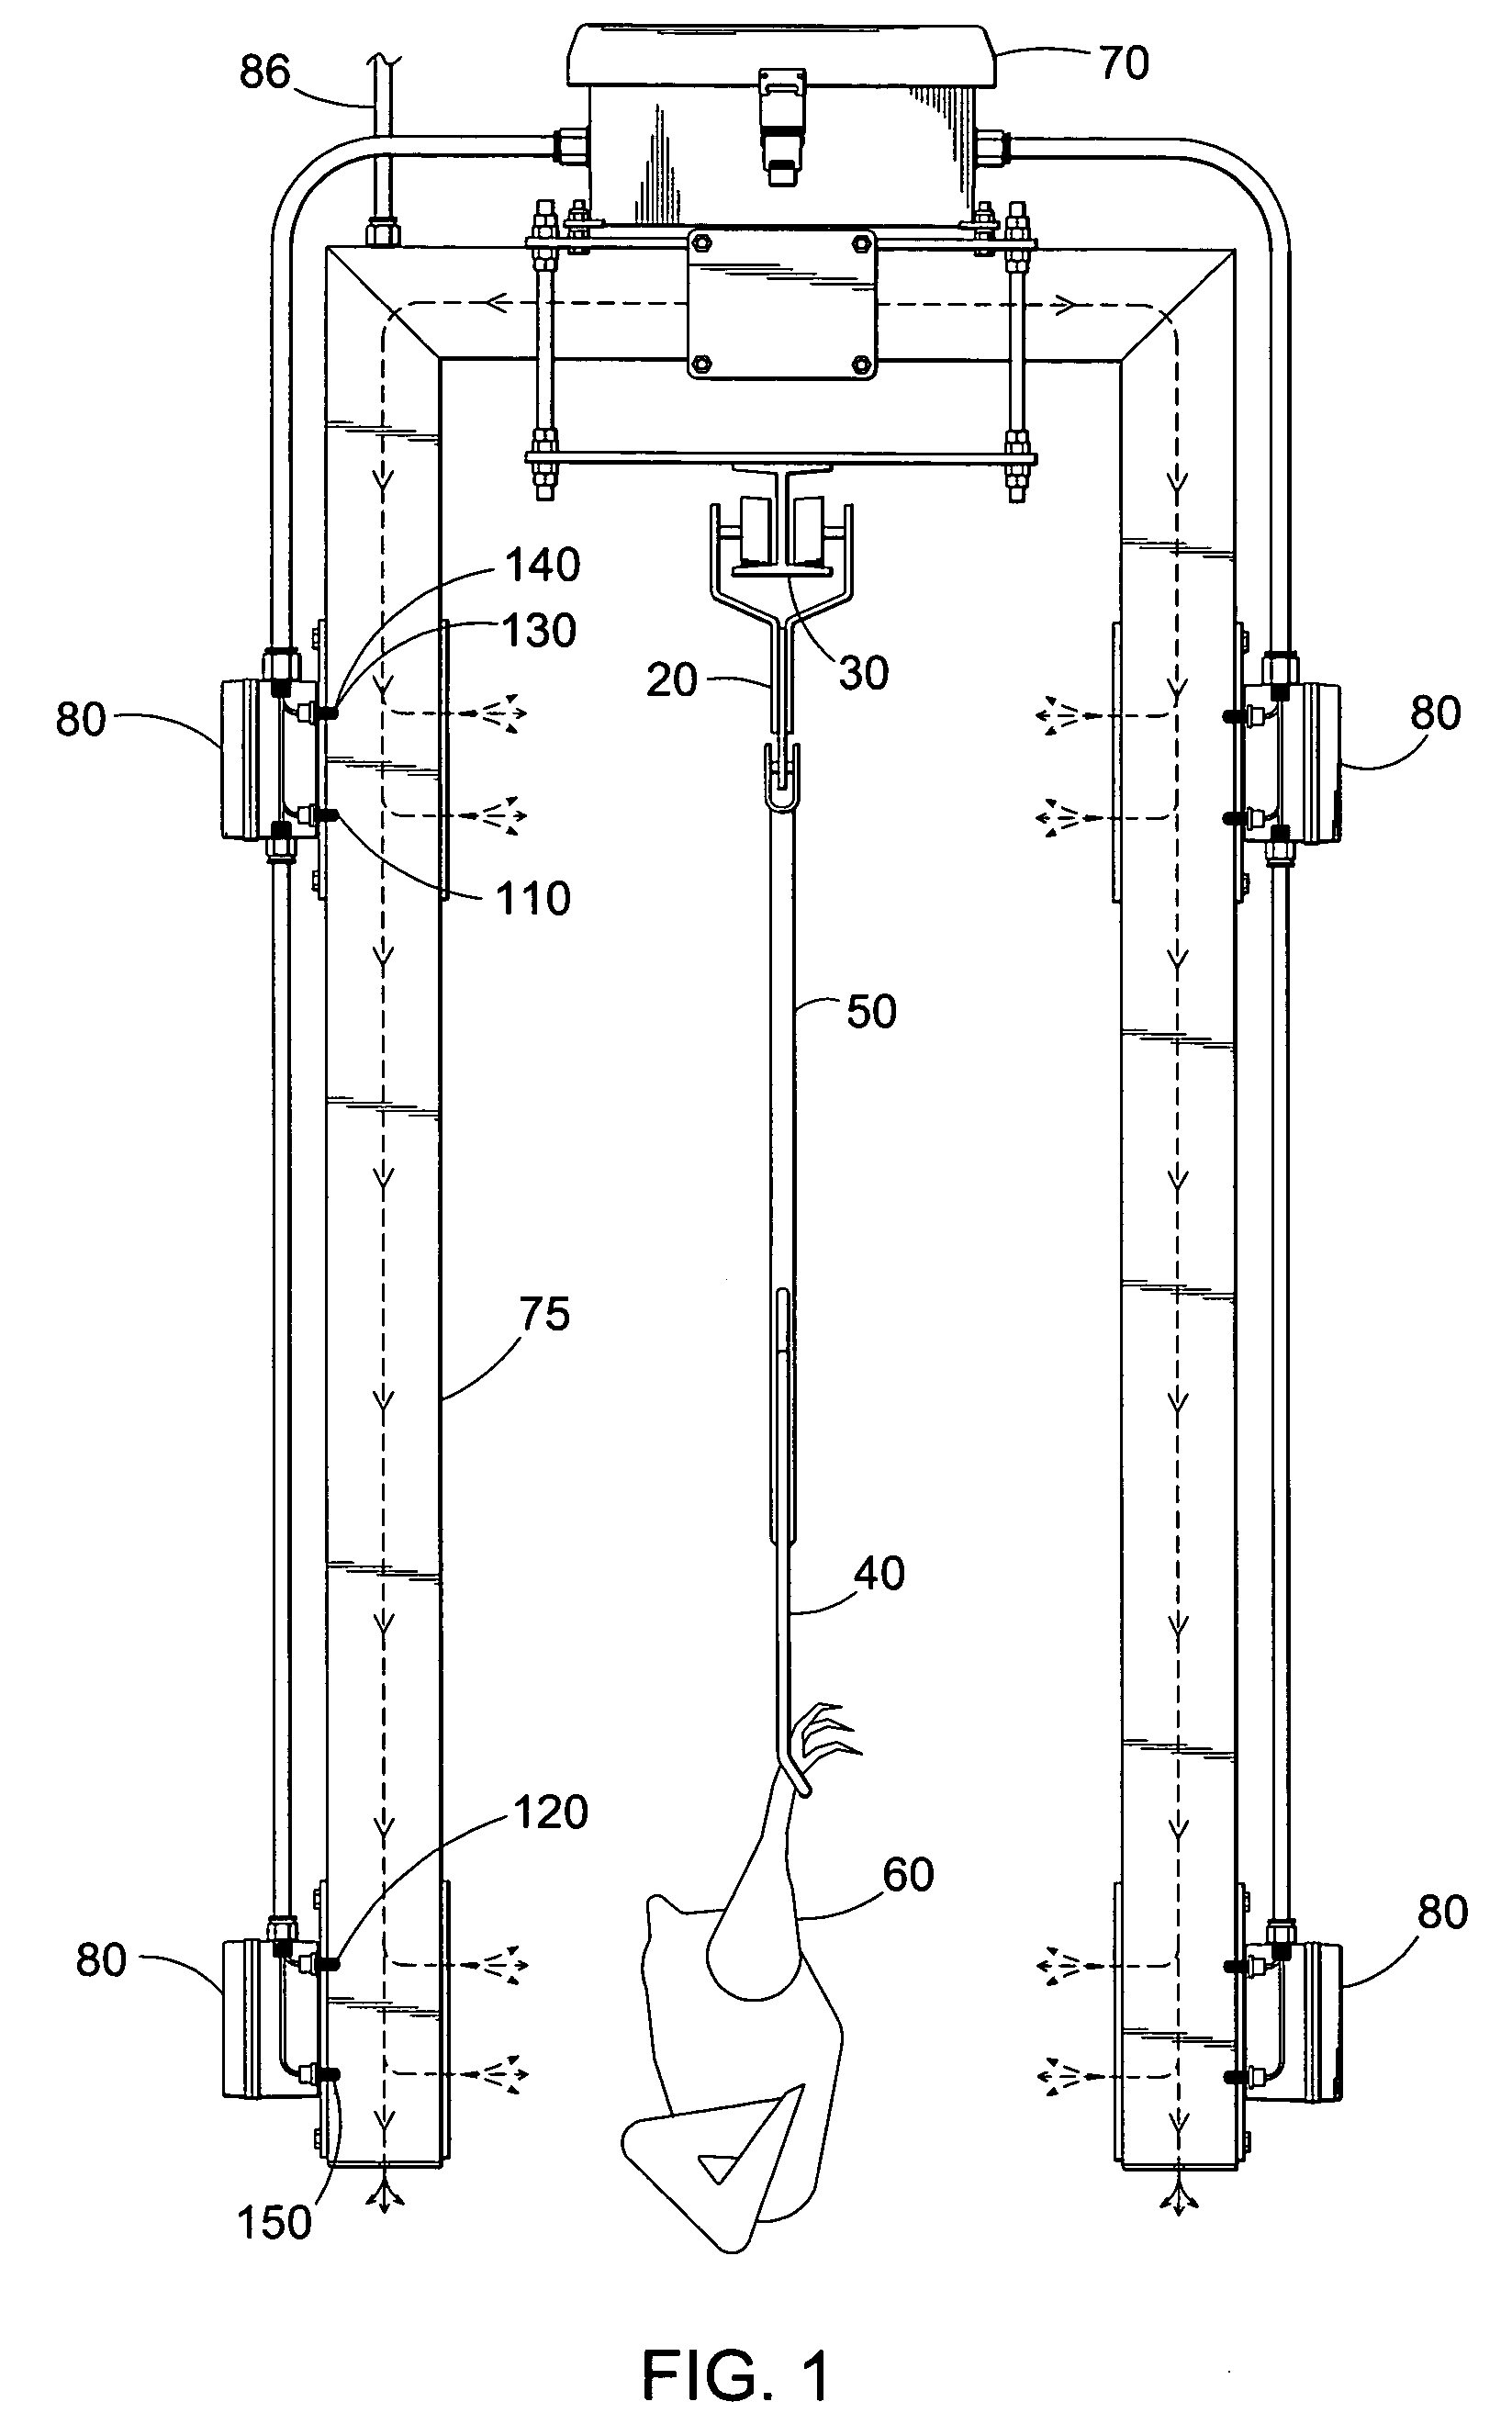 Counting apparatus and method for a poultry processing plant